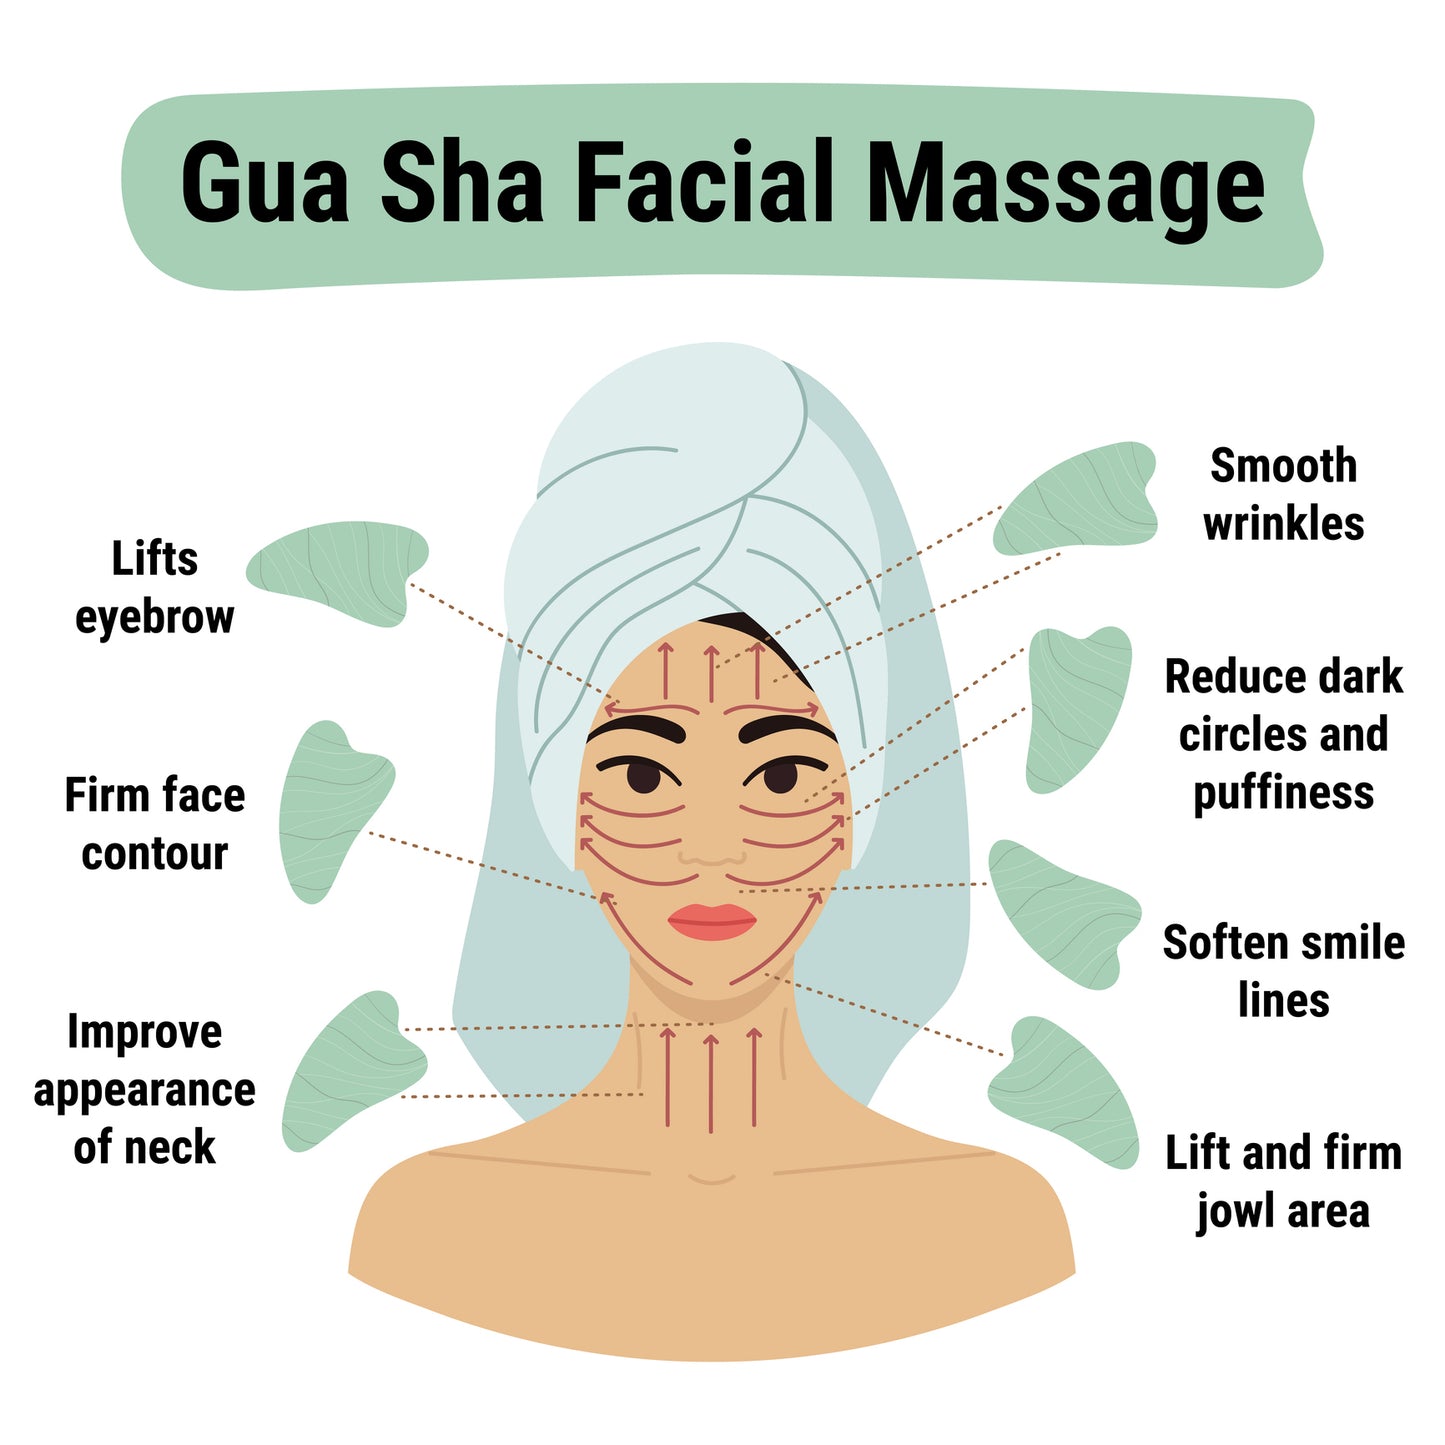 Gua Sha Facial Massage How To Graphic, lymphatic drainage, face massage, anti aging, wellness gift, self care gift, botox alternative